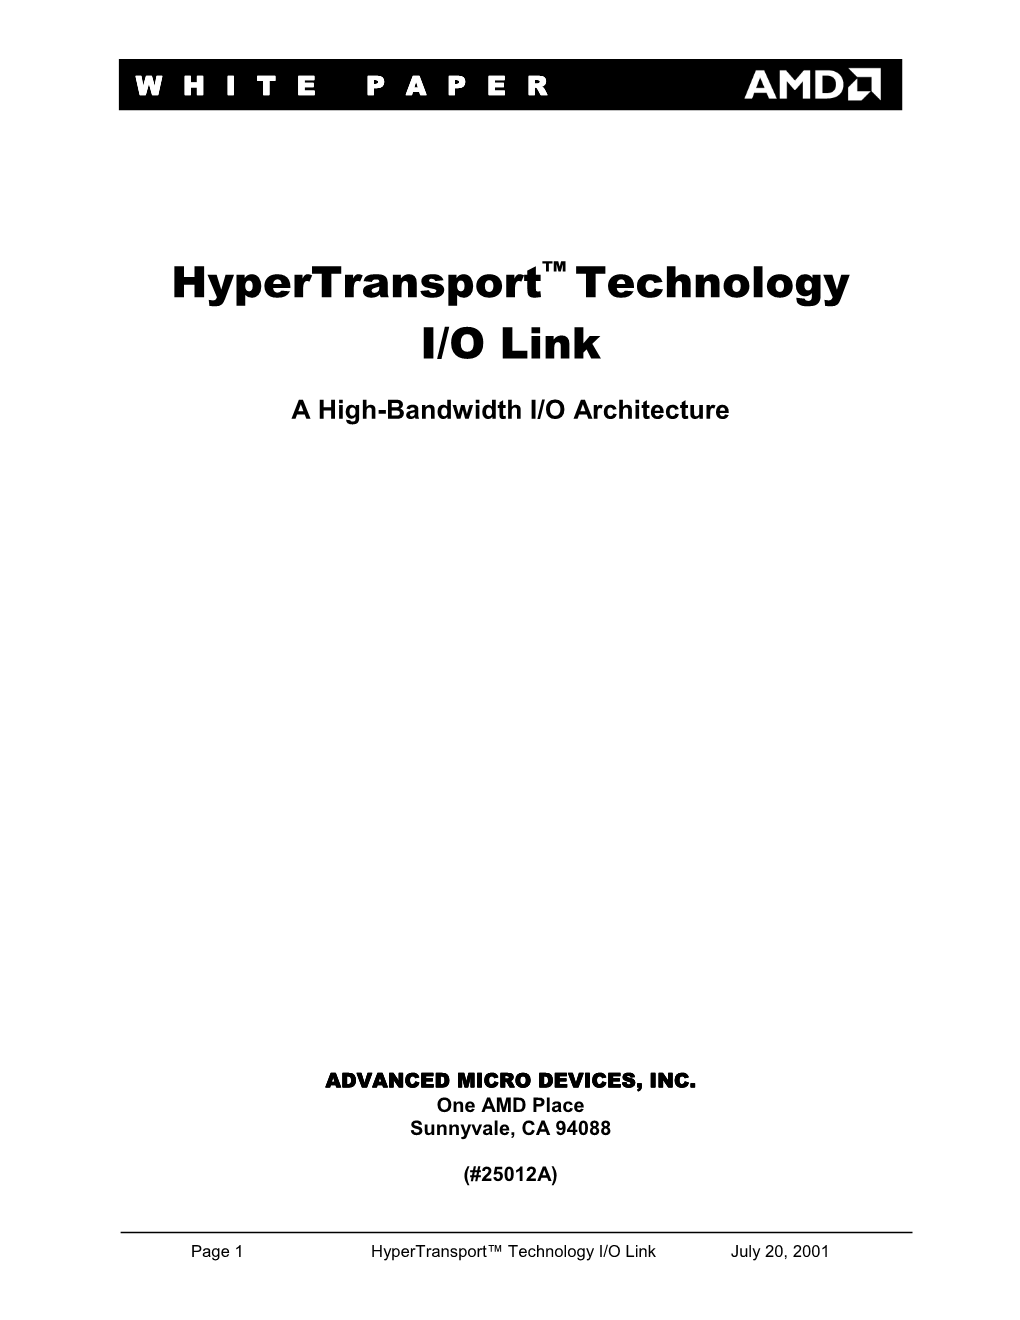 Hypertransport Technology Is Compatible with Existing Models and Requires Little Or No Changes to Existing Operating System and Driver Software